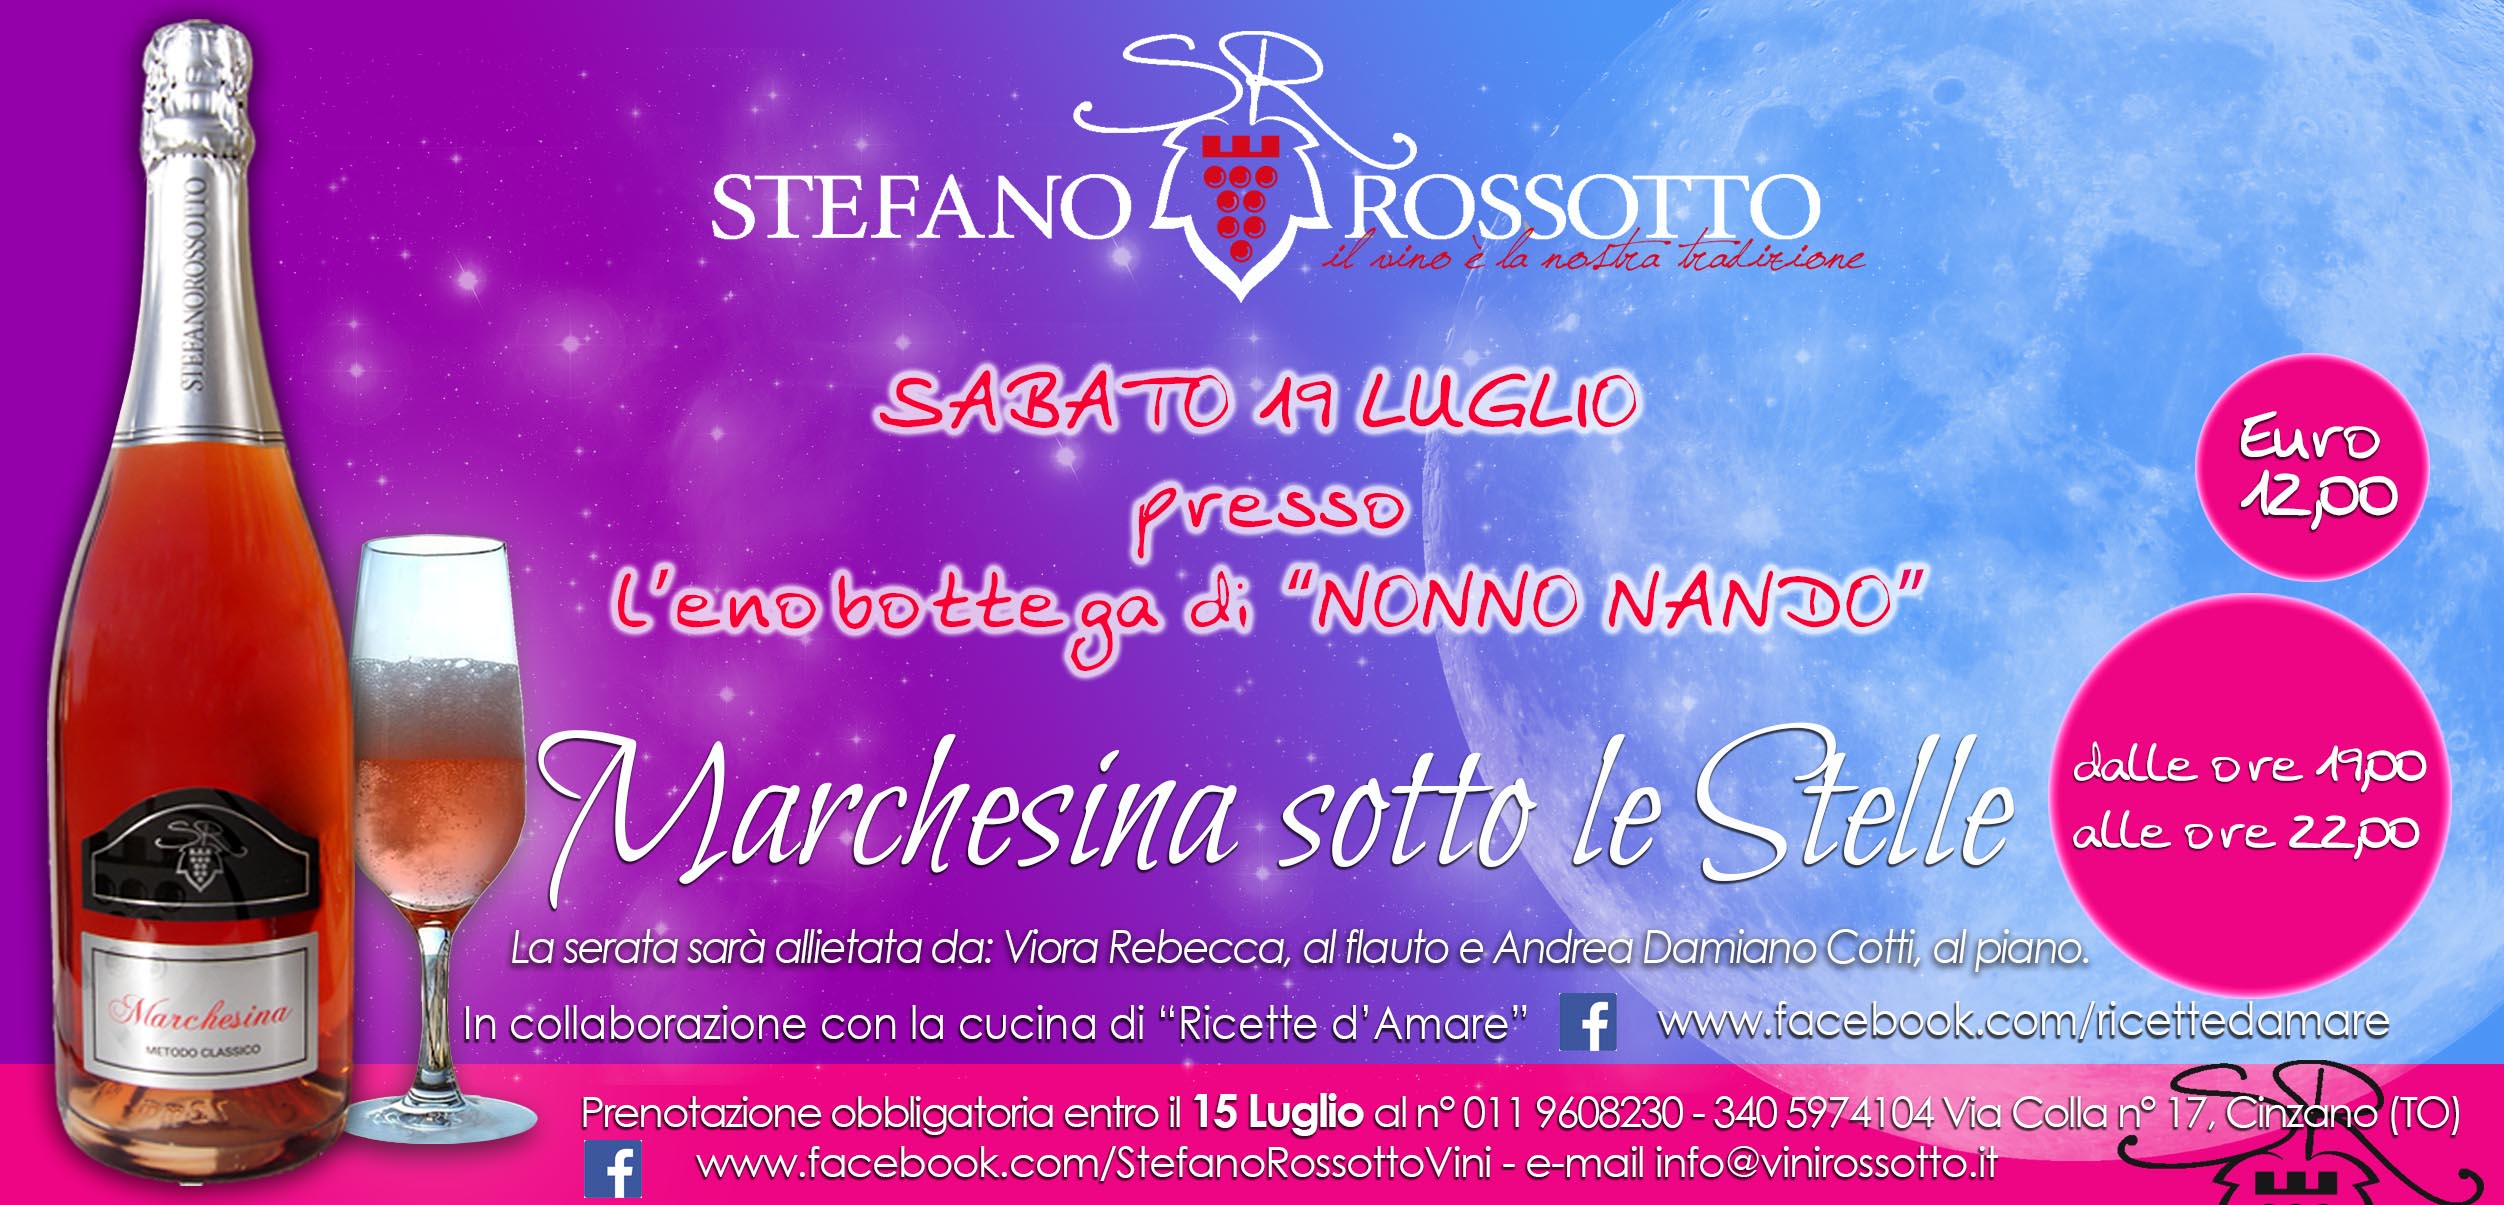 Marchesina sotto le stelle